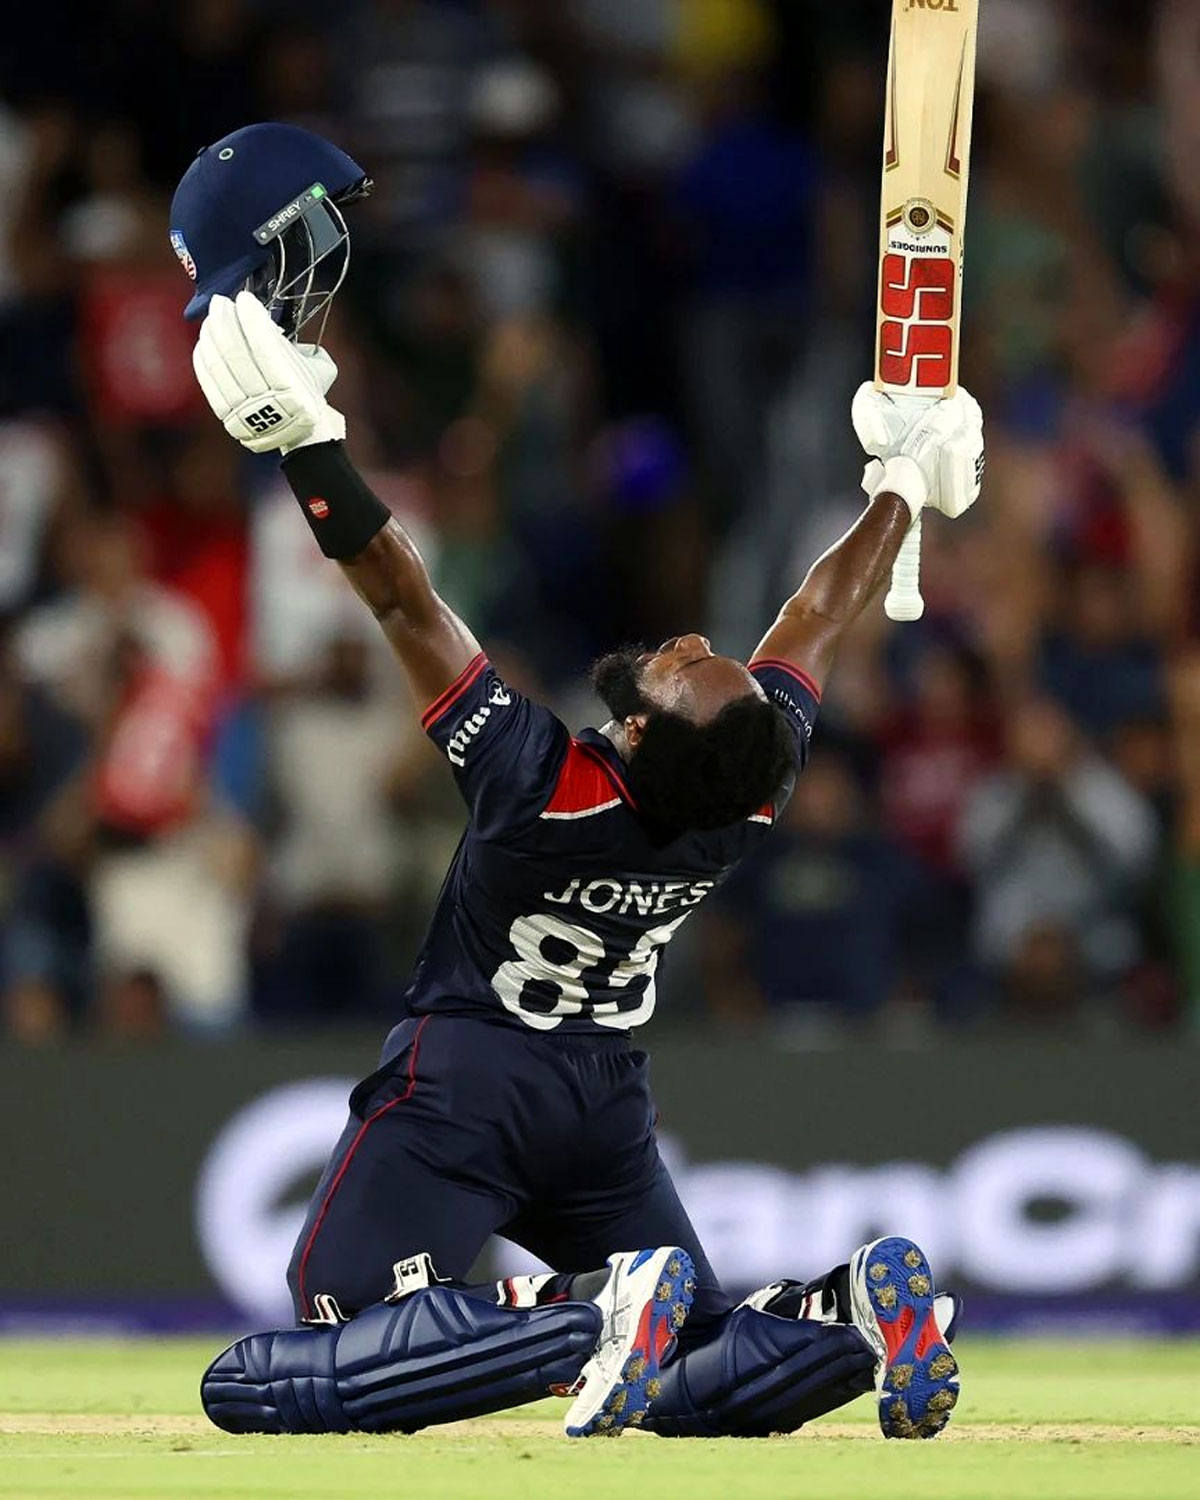 Aaron Jones celebrates after powering the United States of America to an easy victory over Canada in the T20 World Cup opener in Dallas on Saturday.